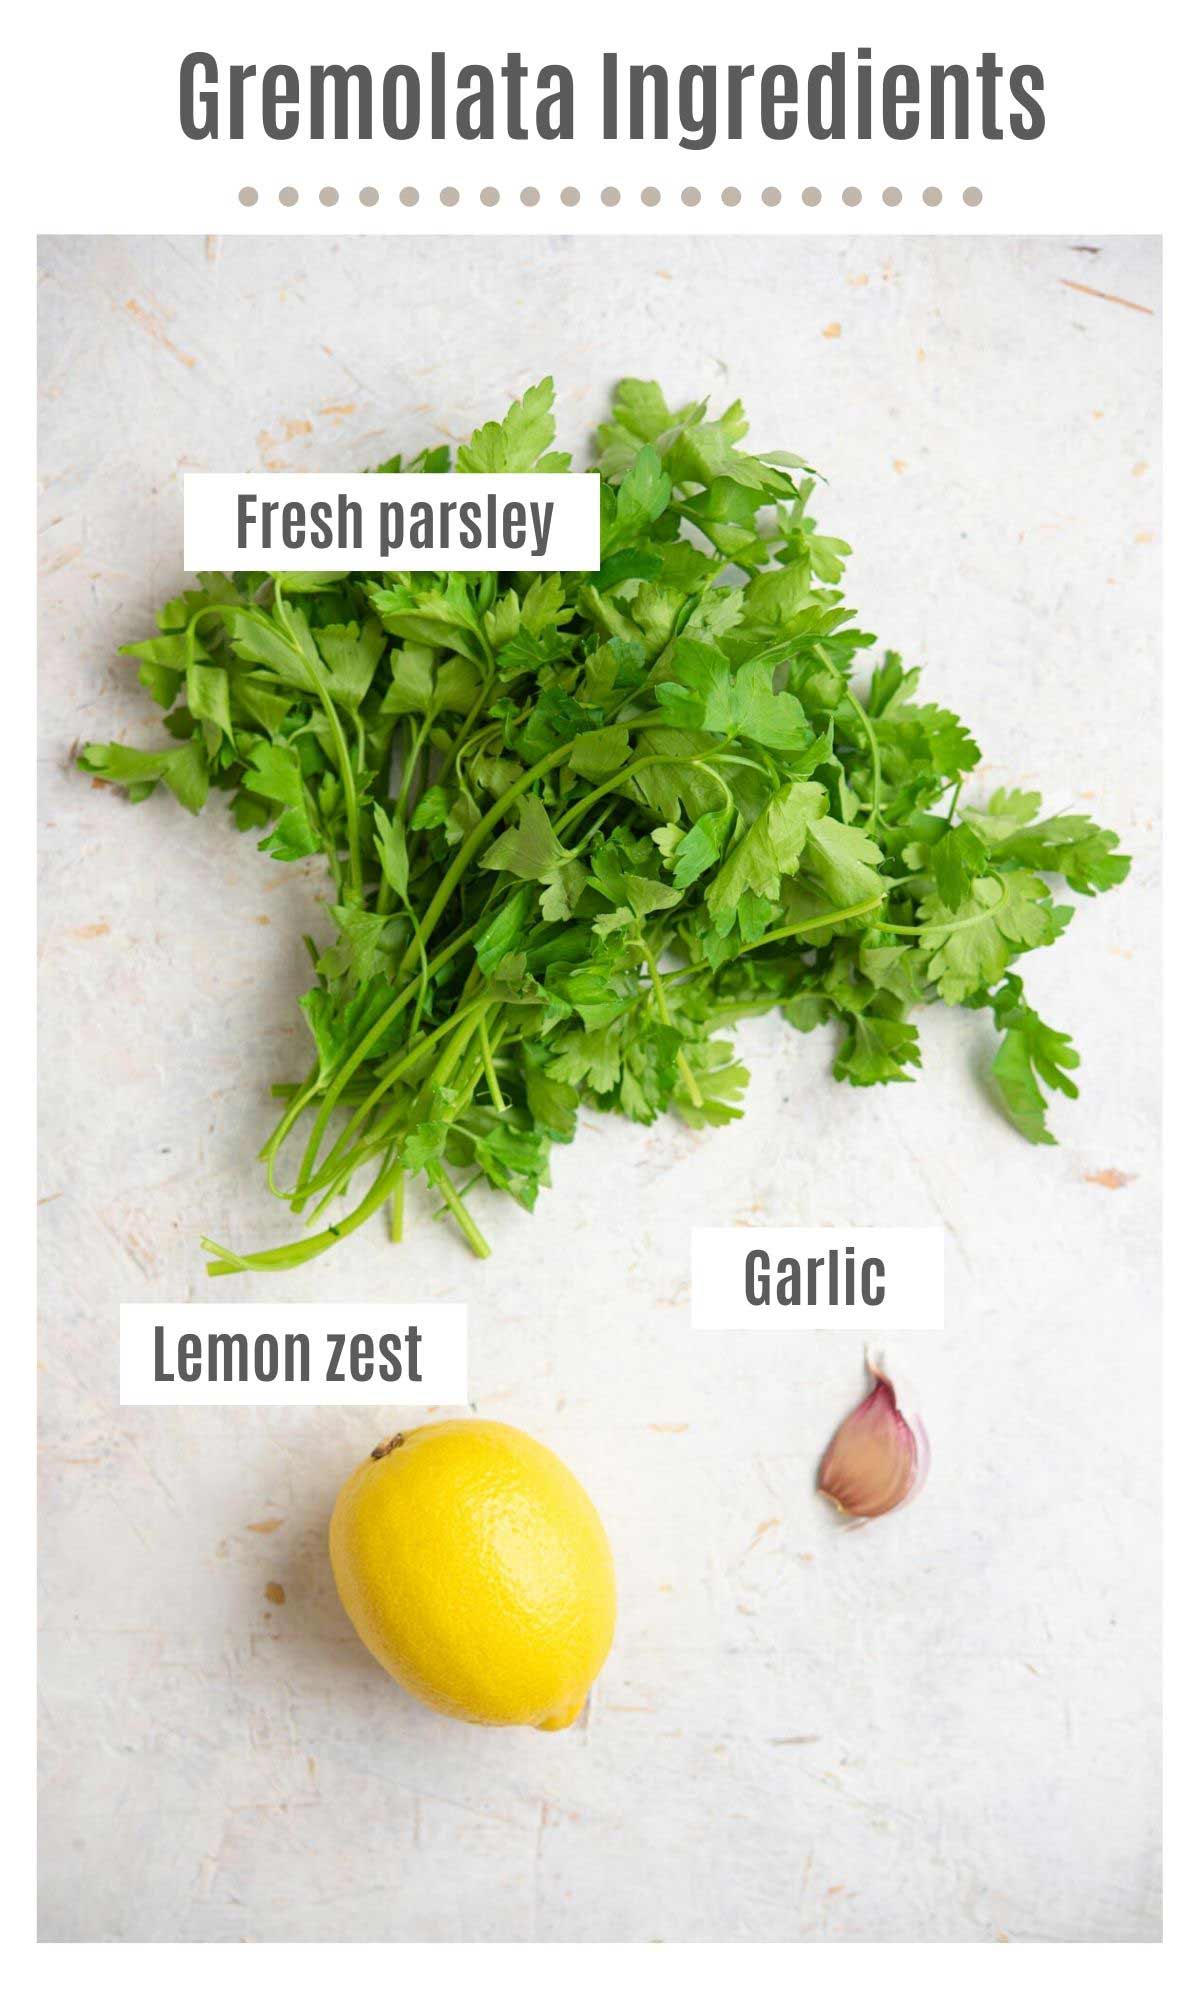 An overhead shot of all the ingredients you need to make gremolata